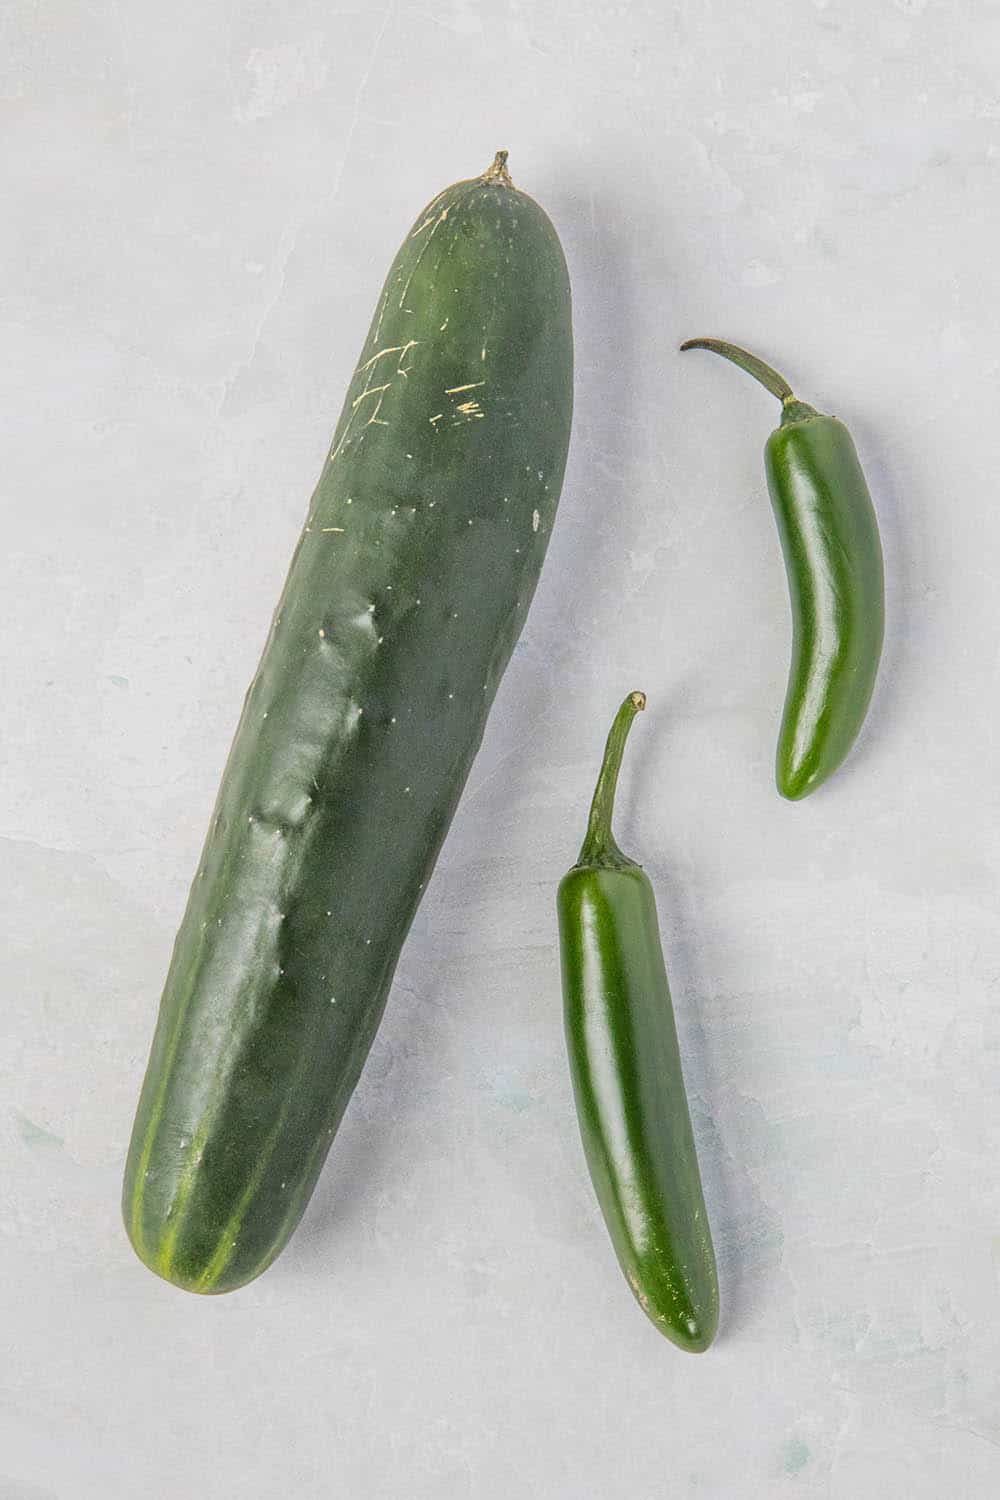 Cucumbers and serrano peppers